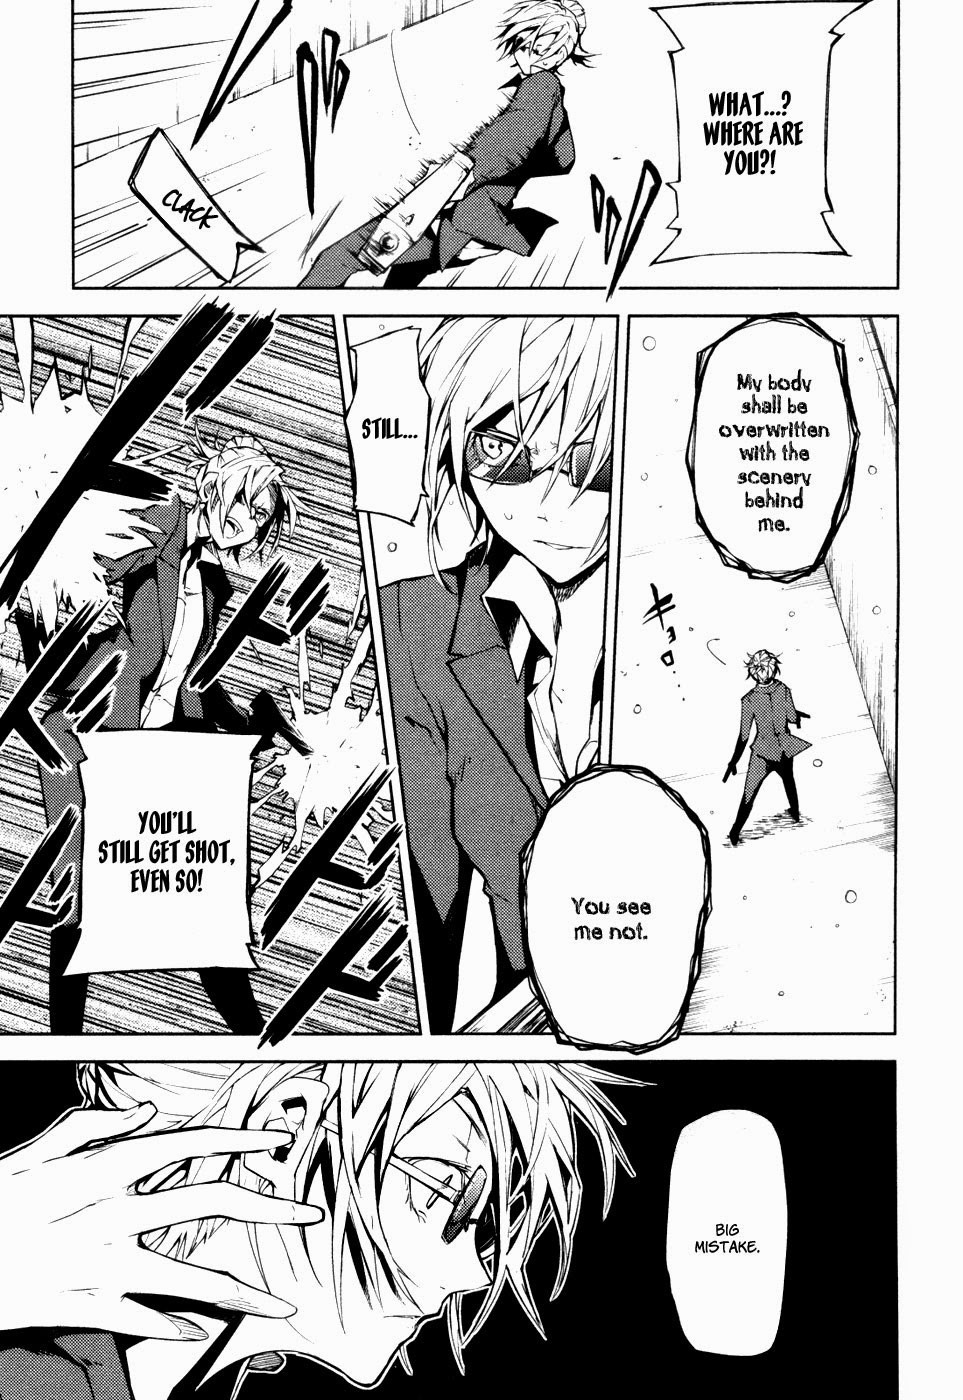 Bungo Stray Dogs chapter 4 page 11